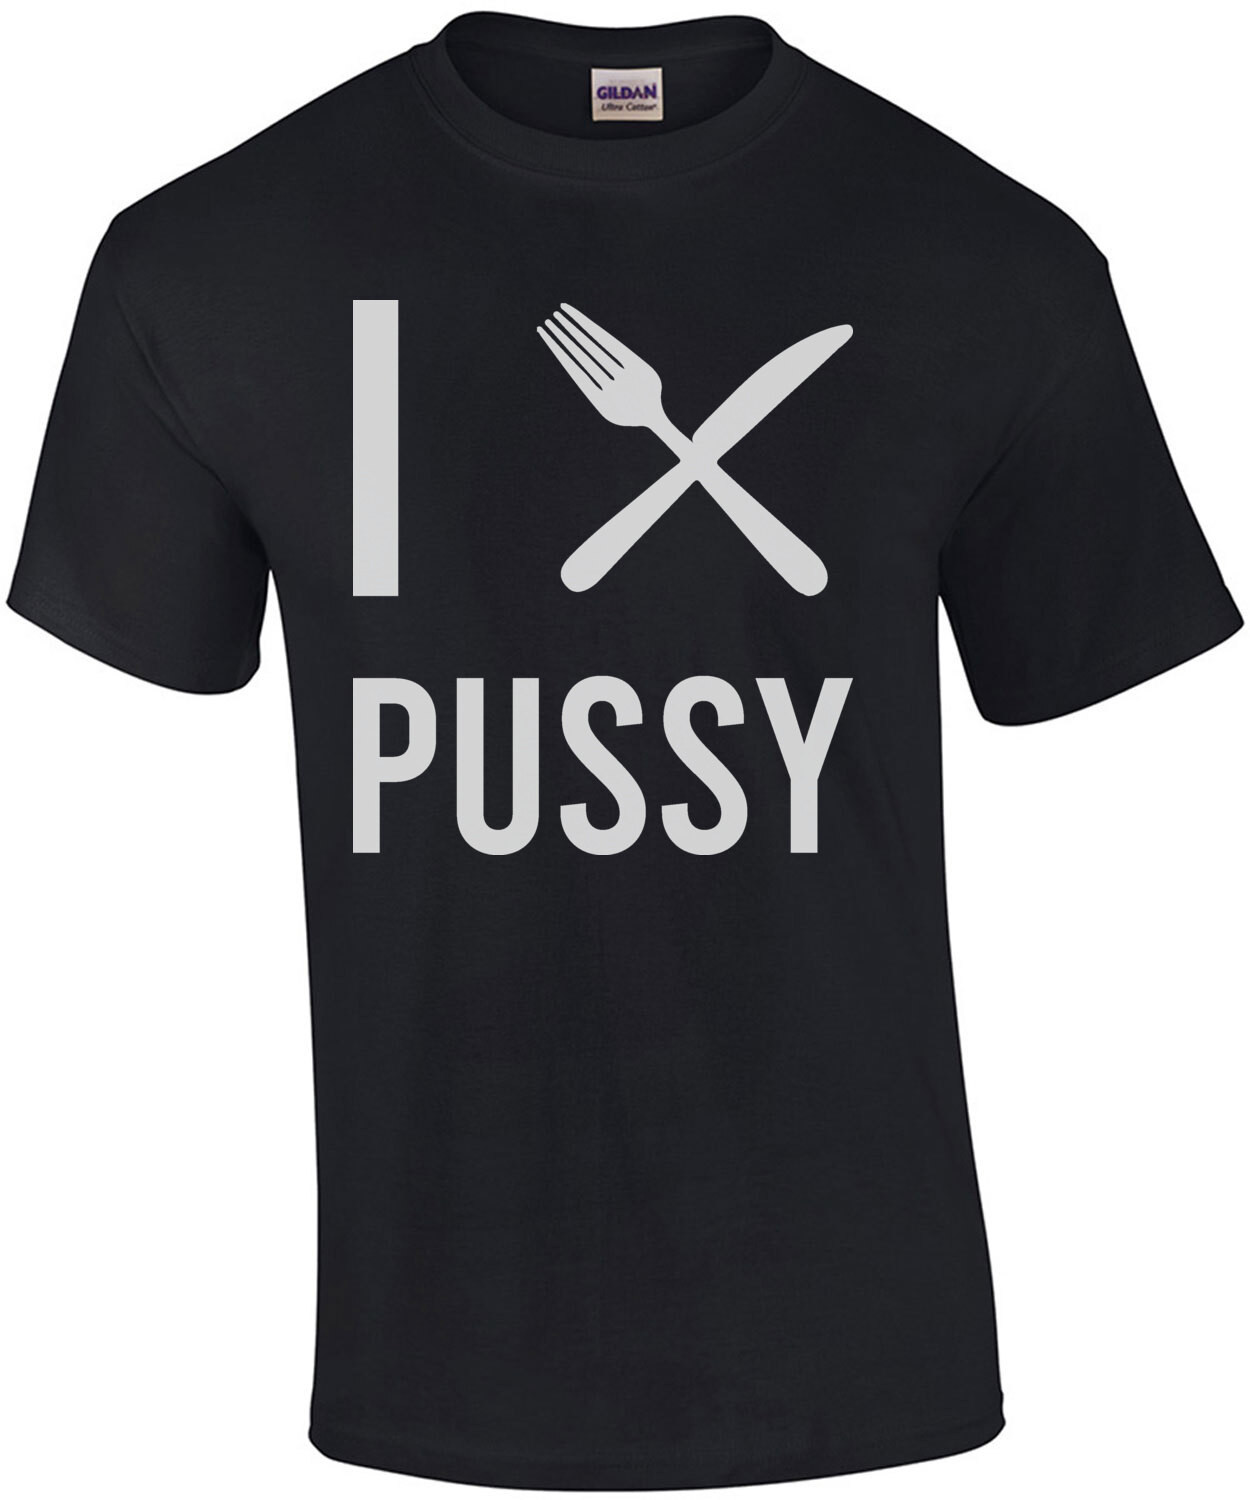 I fork/knife (Eat) Pussy - Offensive Sexual T-Shirt